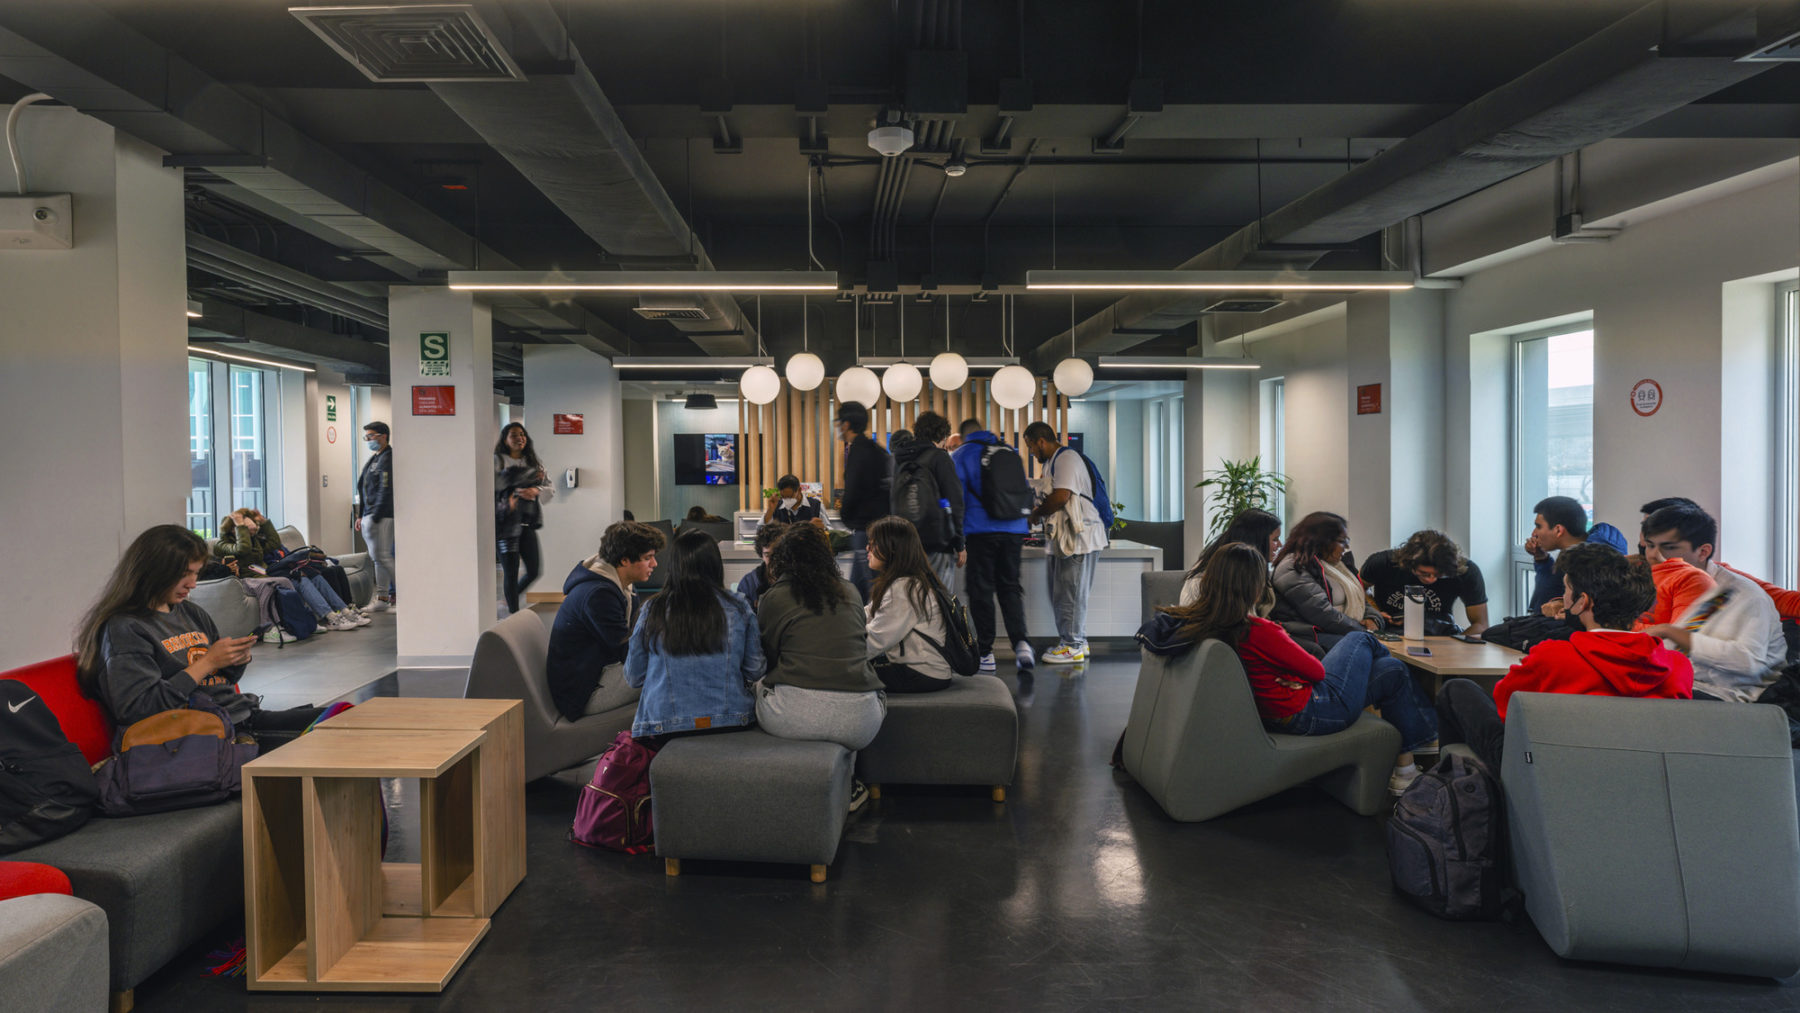 interior photo of student lounge with groups of students lounging on soft seating